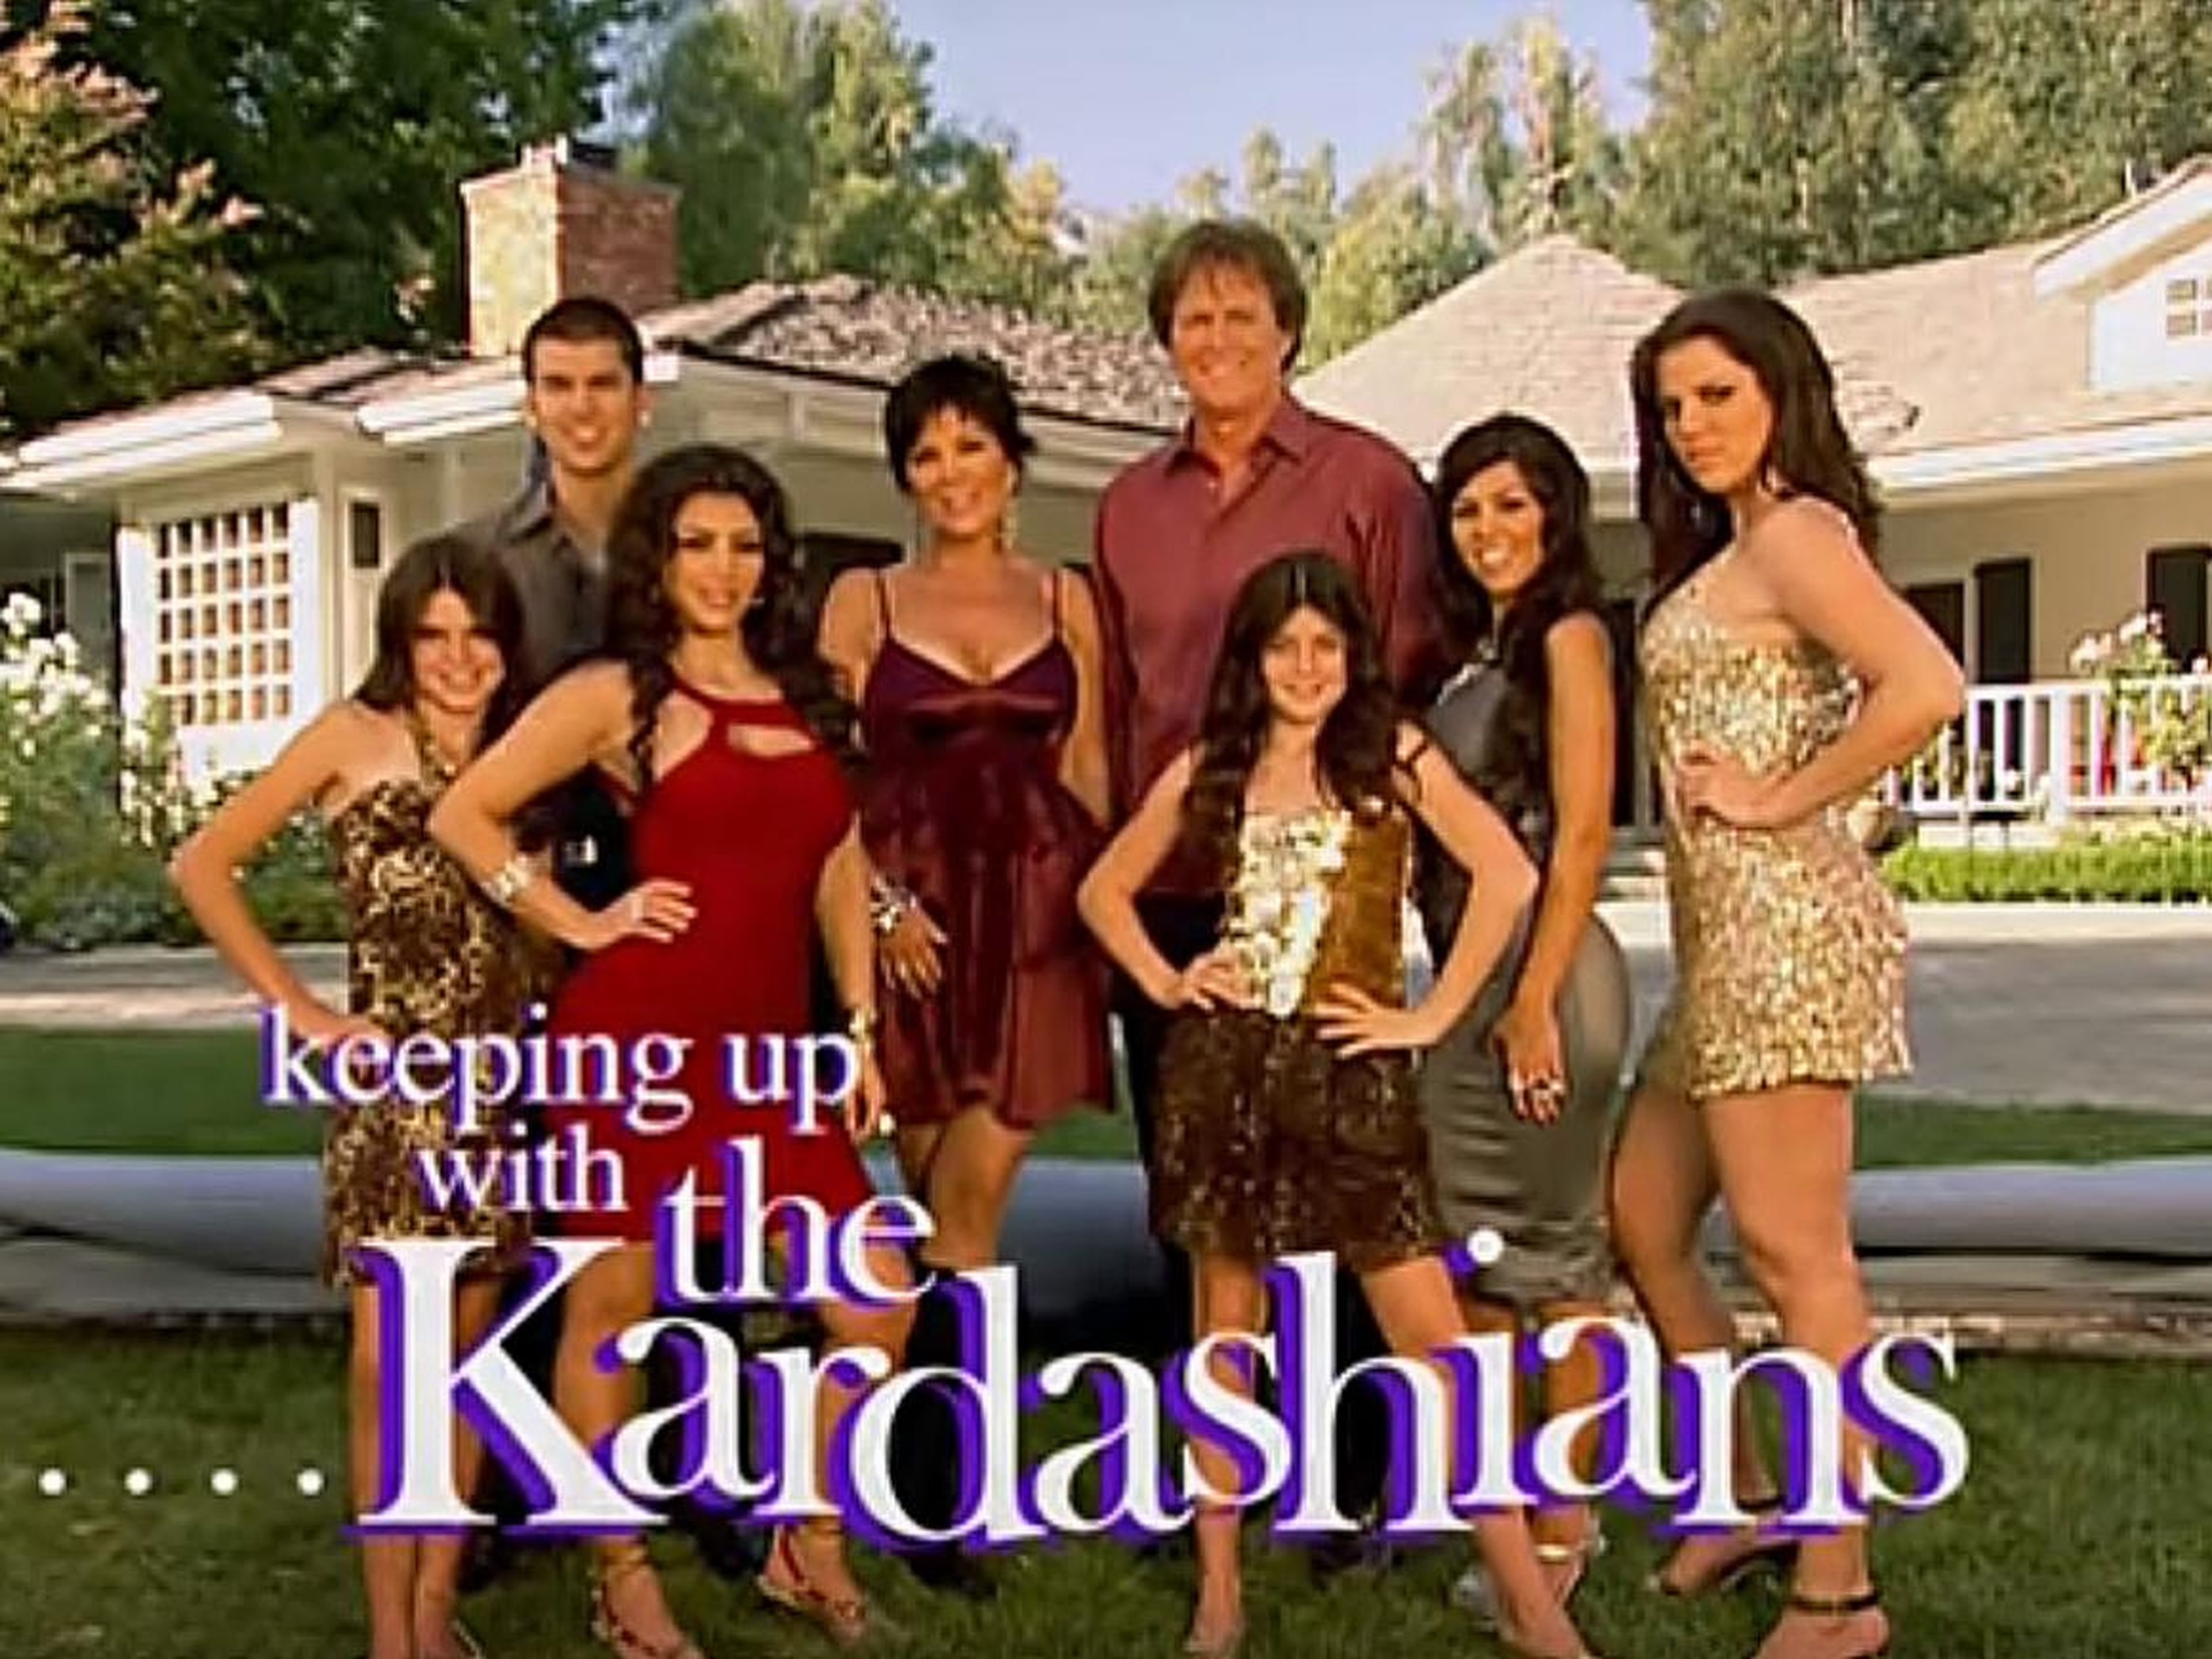 Shortly before the first episode of the family's reality show, "Keeping Up With the Kardashians," aired in October 2007, Kim became the center of a scandal that some say catapulted her career.